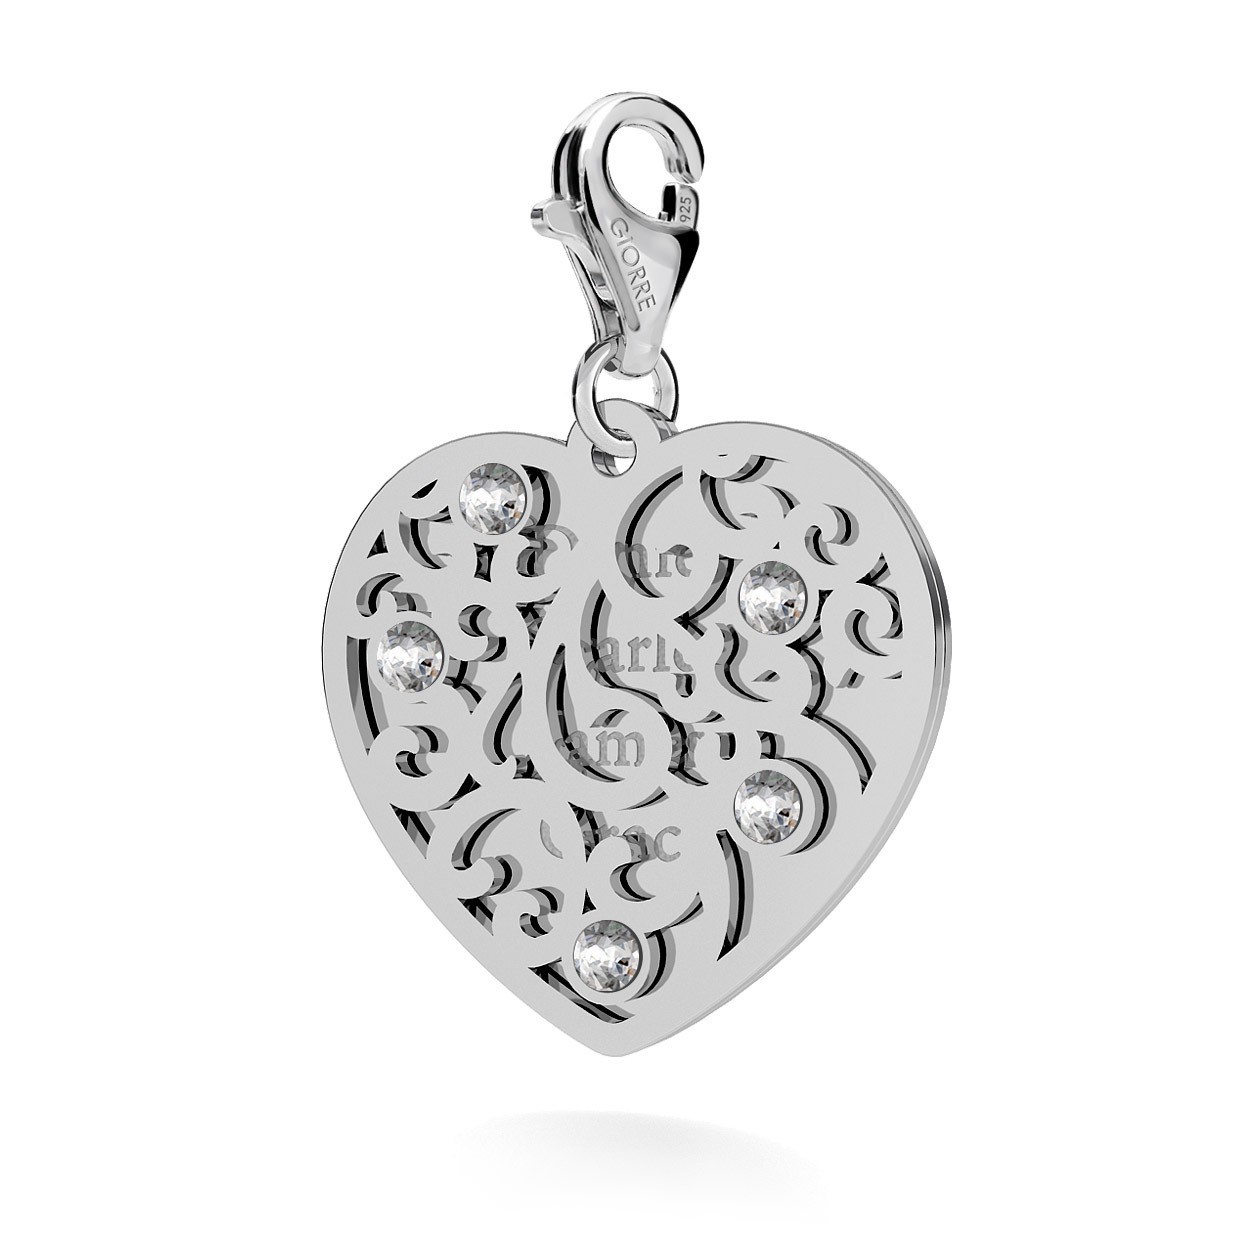 CHARMS 203, TWO HEARTS WITH ENGRAVING, SWAROVSKI